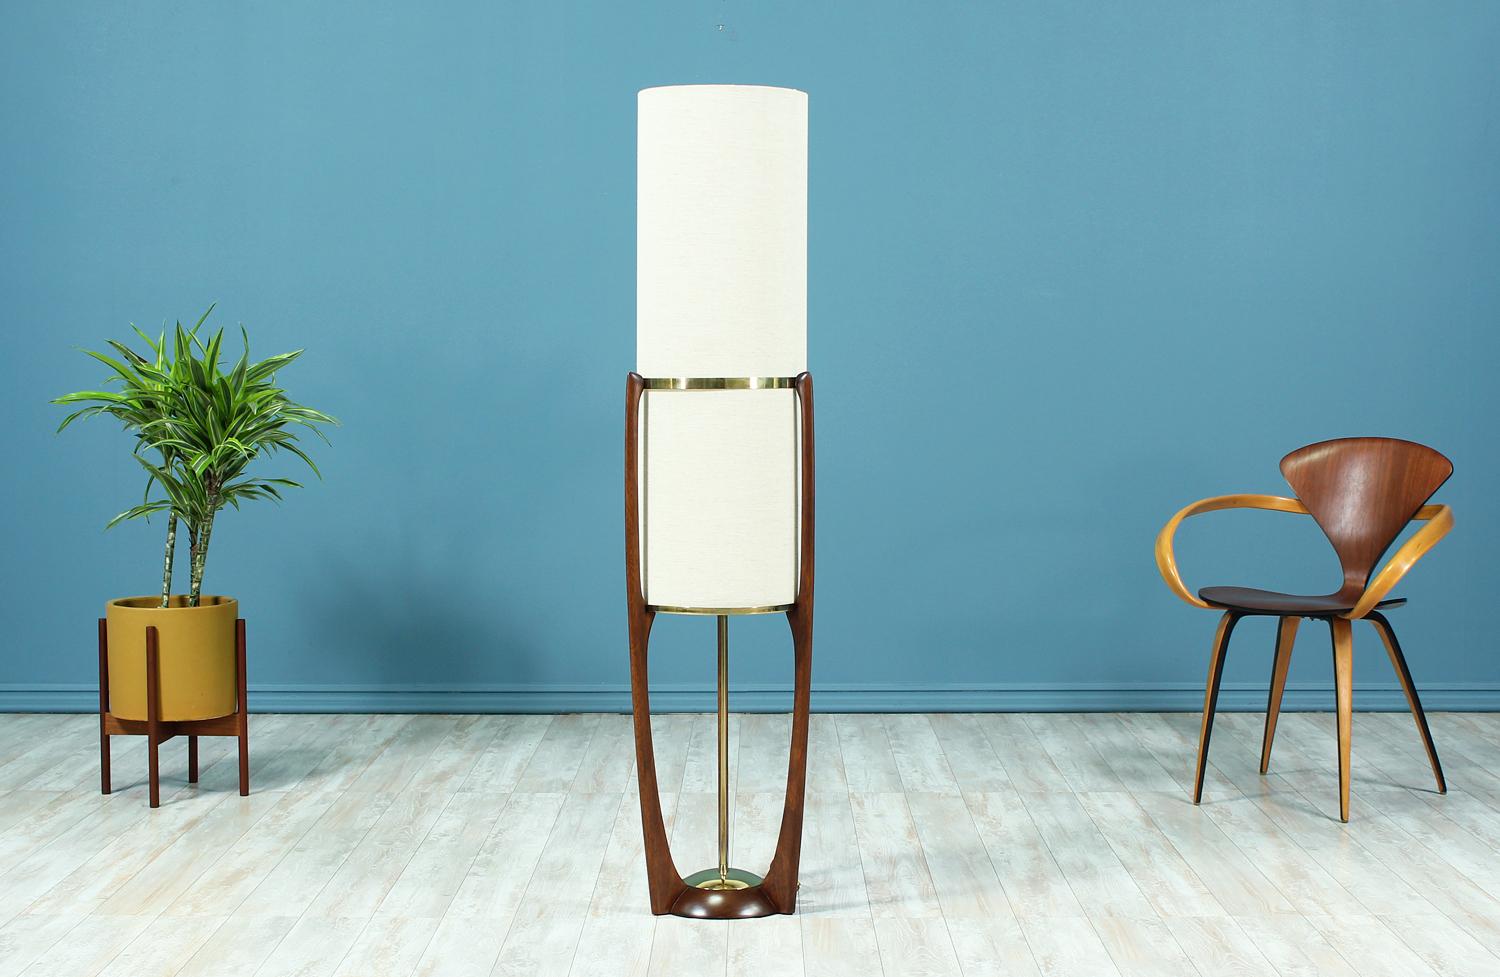 Dazzling floor lamp designed and manufactured by Modeline Lamp Co. in the United States circa 1960’s. This sculptural lamp features a walnut wood frame accentuated by brass hardware that supports the new cylindrical linen shade. This lamp has been